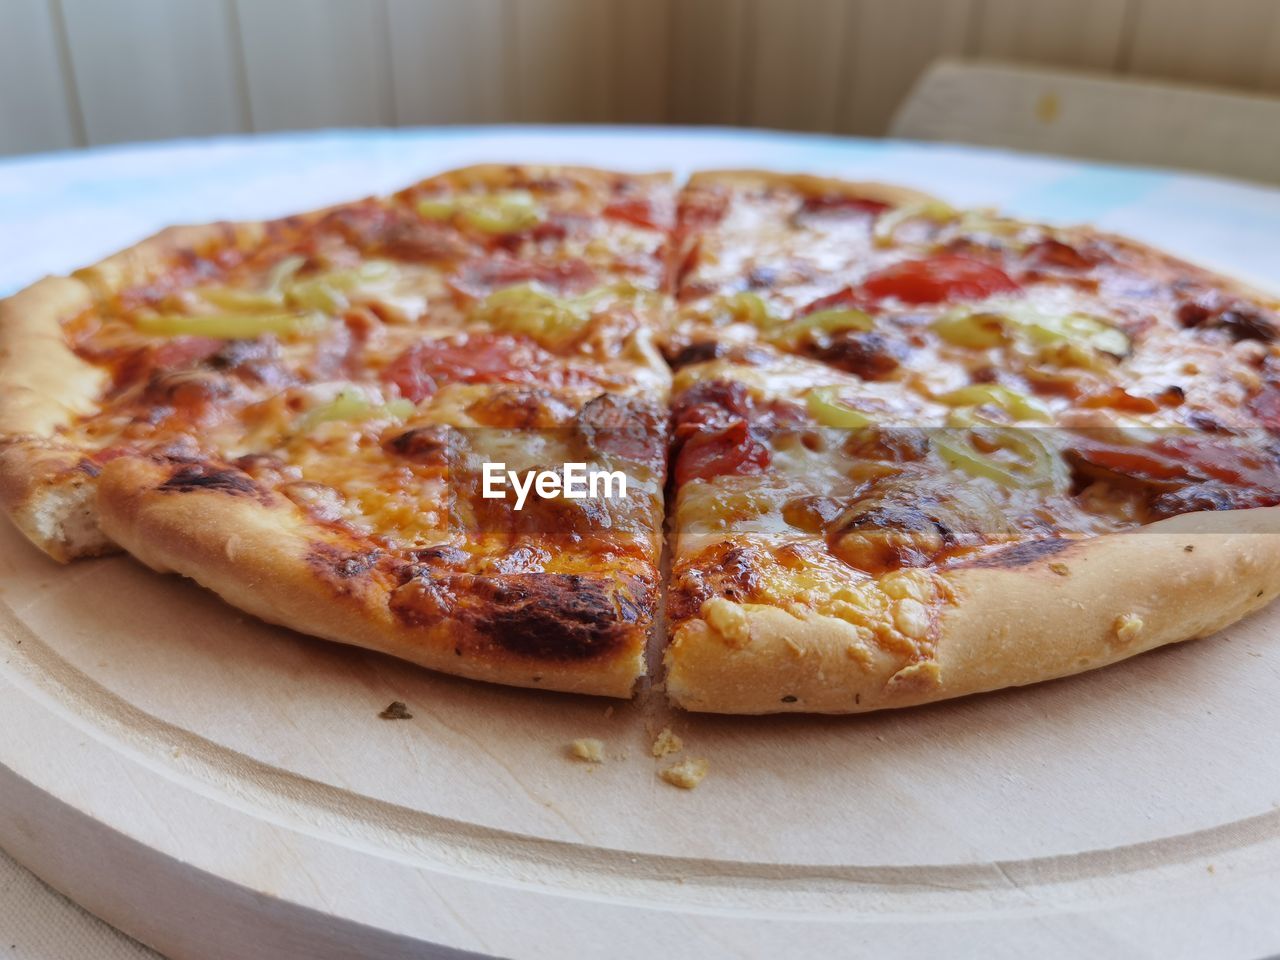 CLOSE-UP OF PIZZA SERVED ON TABLE